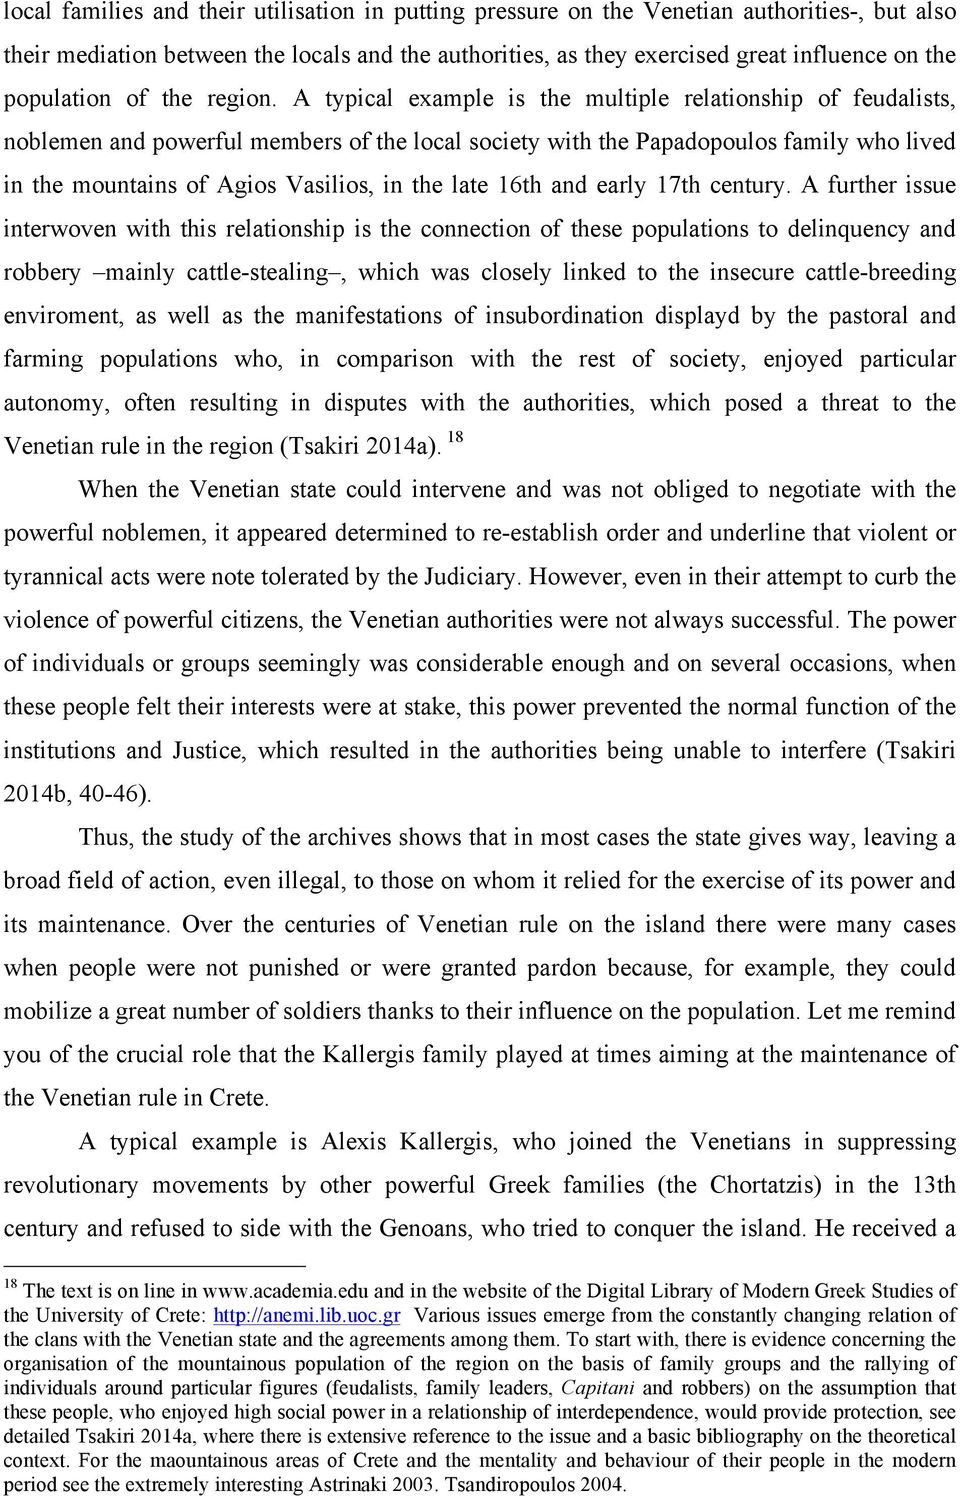 A typical example is the multiple relationship of feudalists, noblemen and powerful members of the local society with the Papadopoulos family who lived in the mountains of Agios Vasilios, in the late